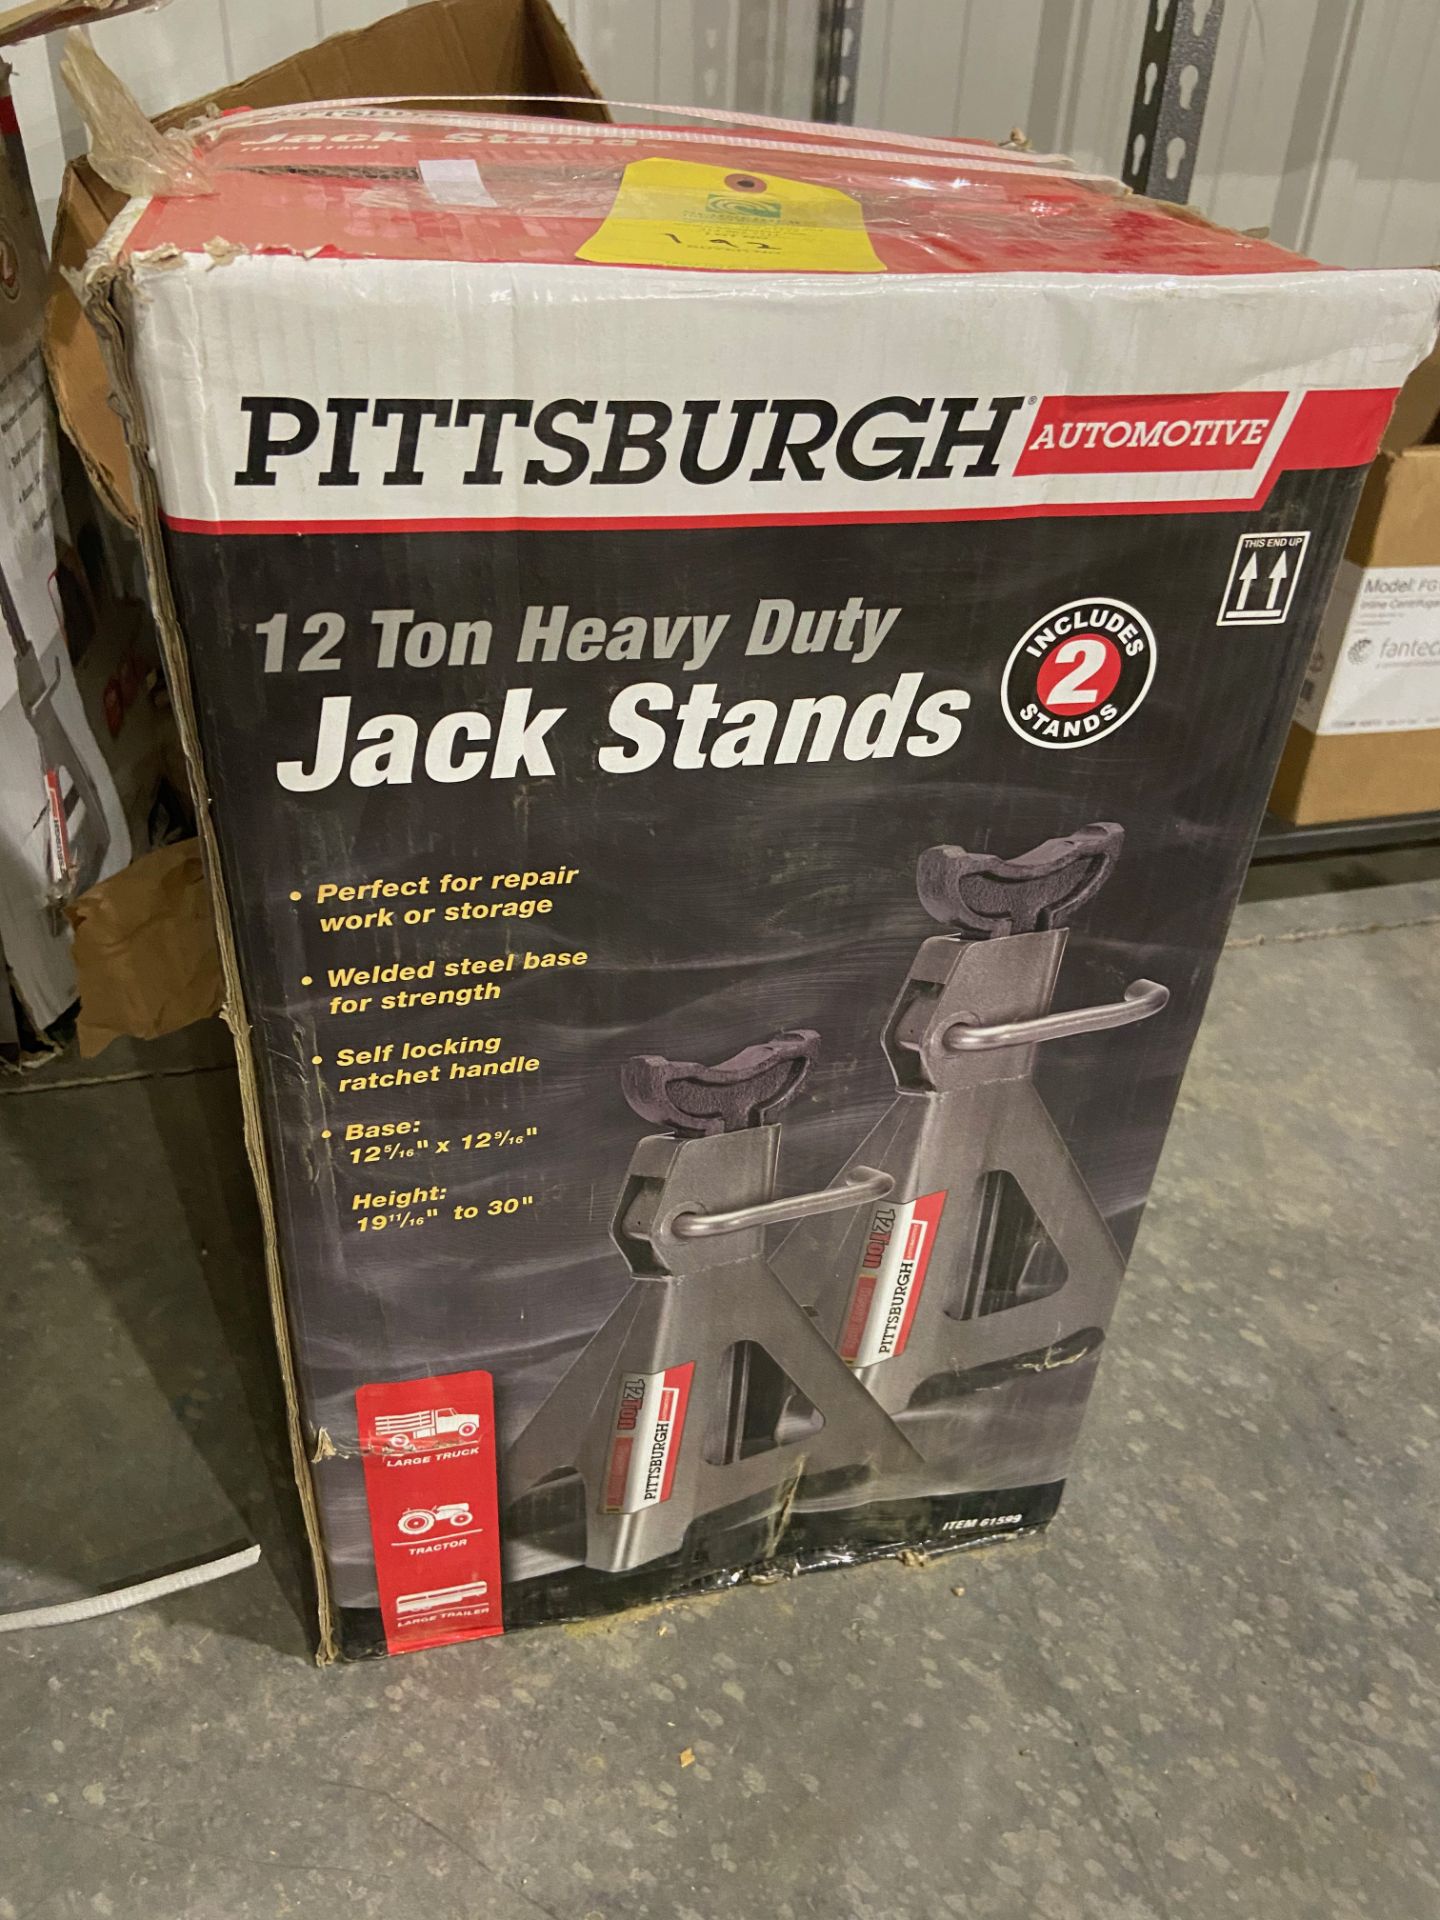 Pittsburgh Automotive 12 Ton Heavy Duty Jack Stand, Rigging Fee: $20 - Image 2 of 3